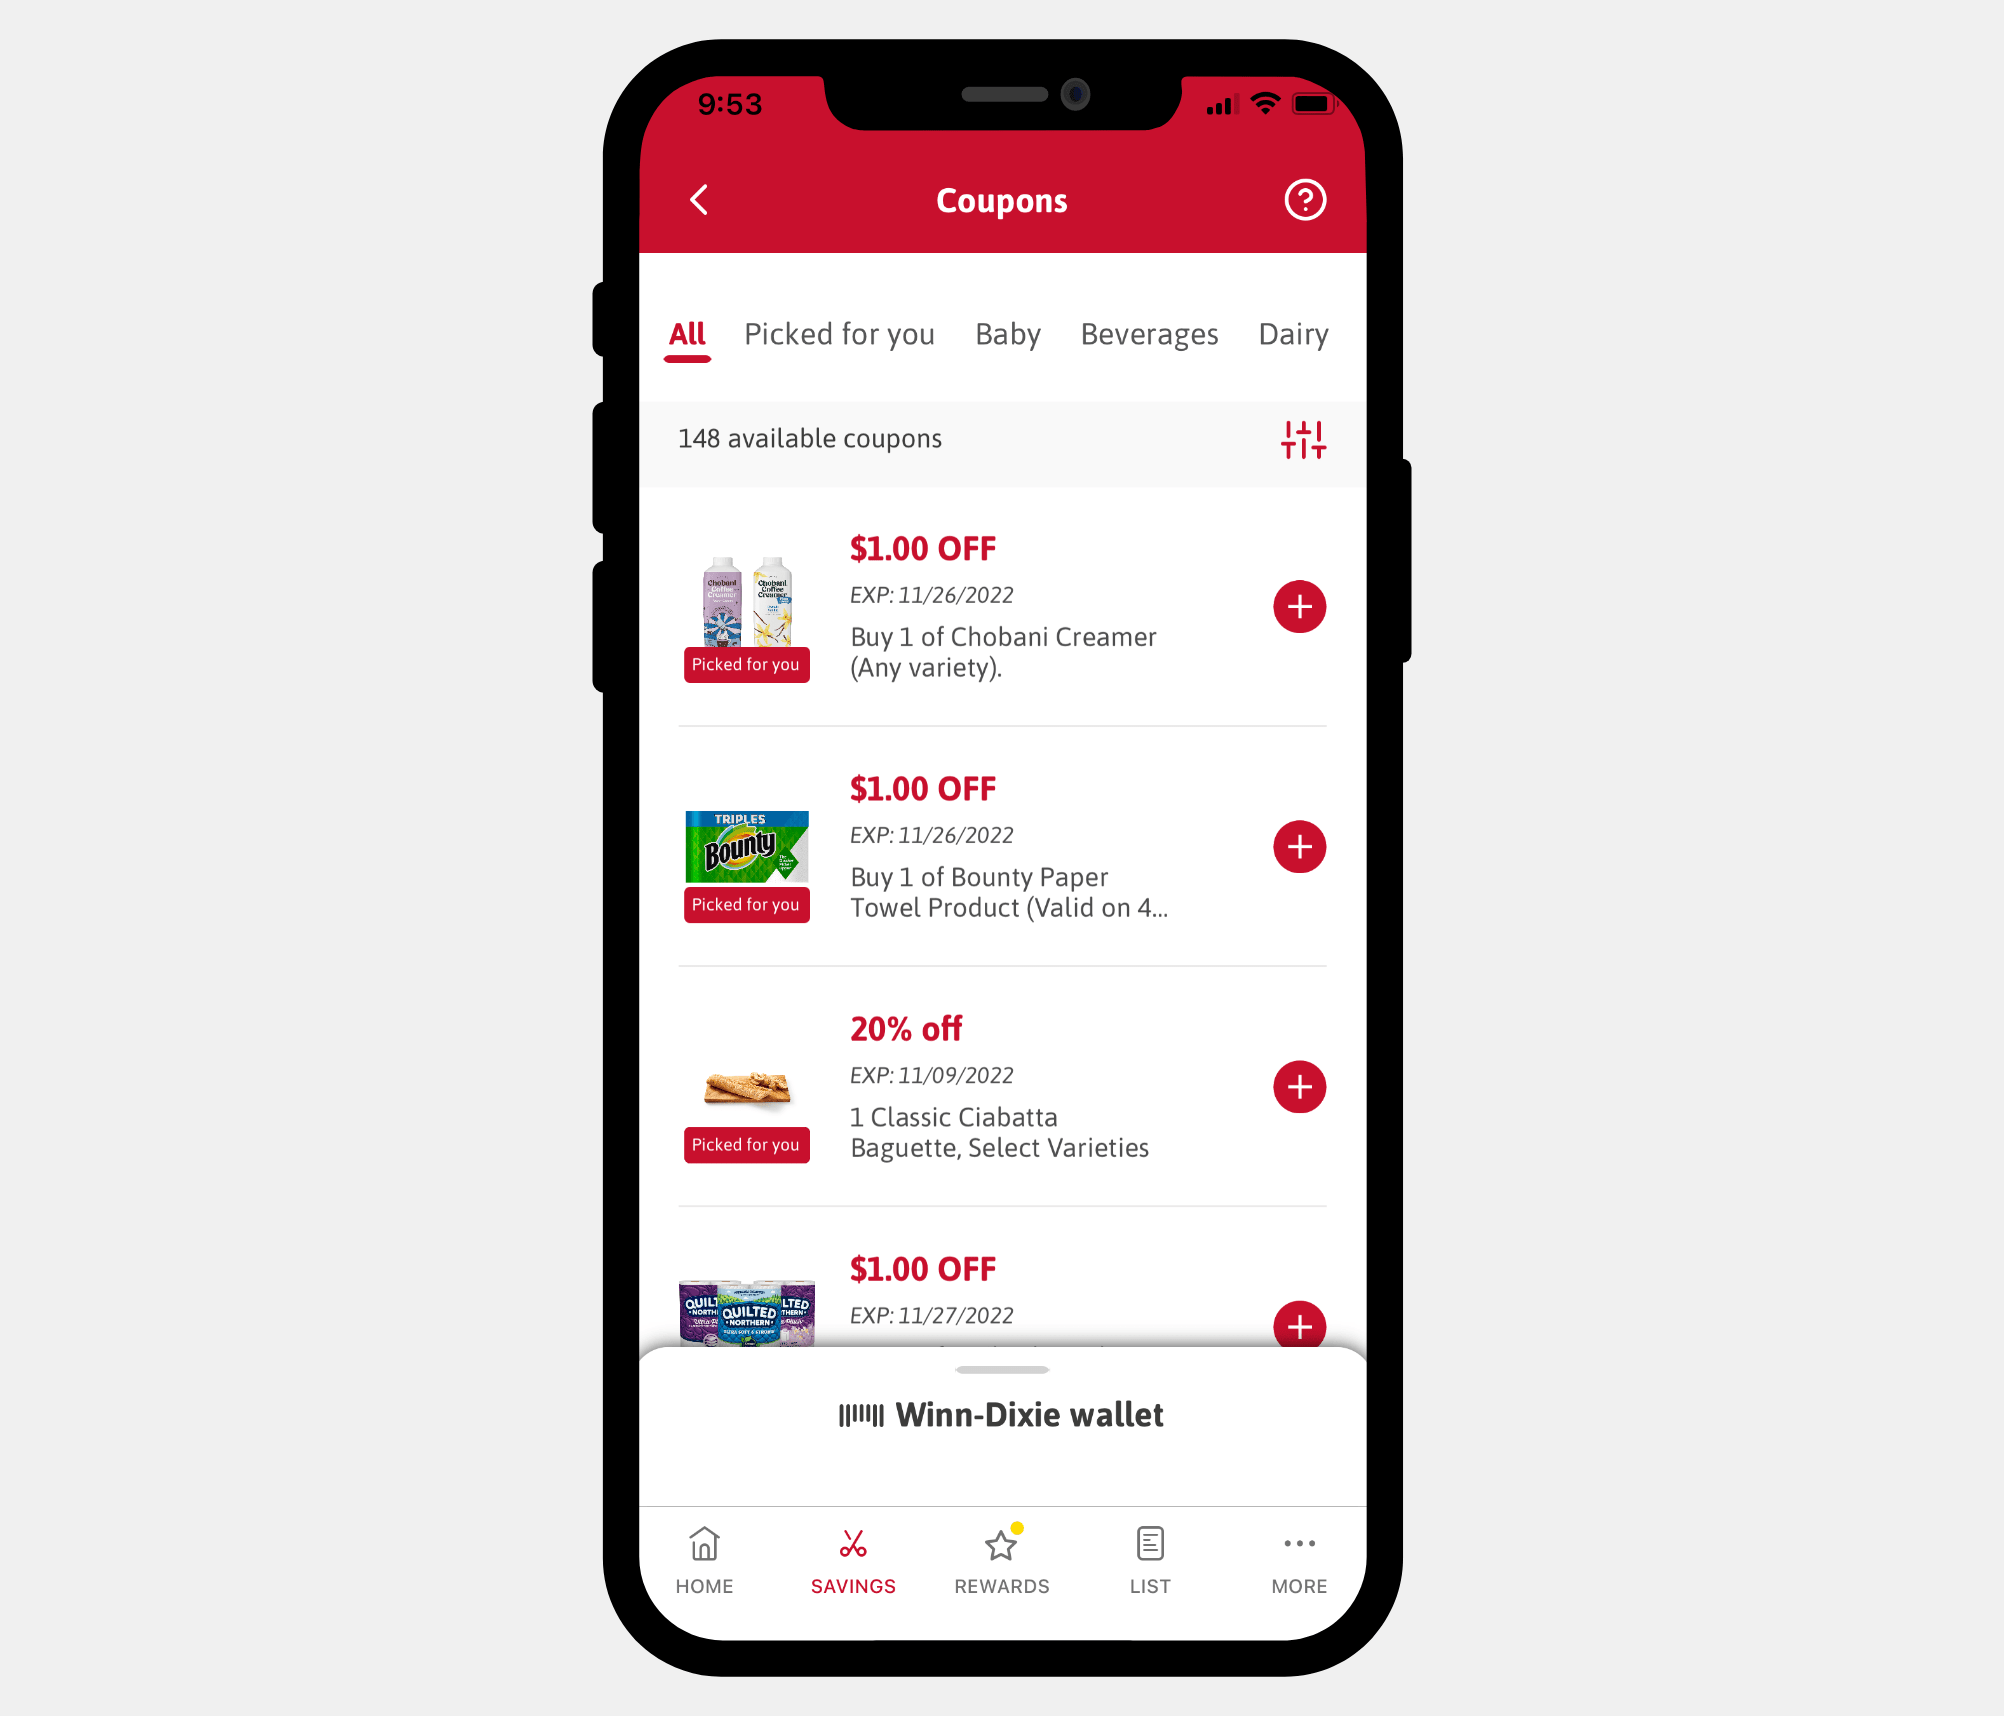 Image of the digital coupons feature on the Winn-Dixie app